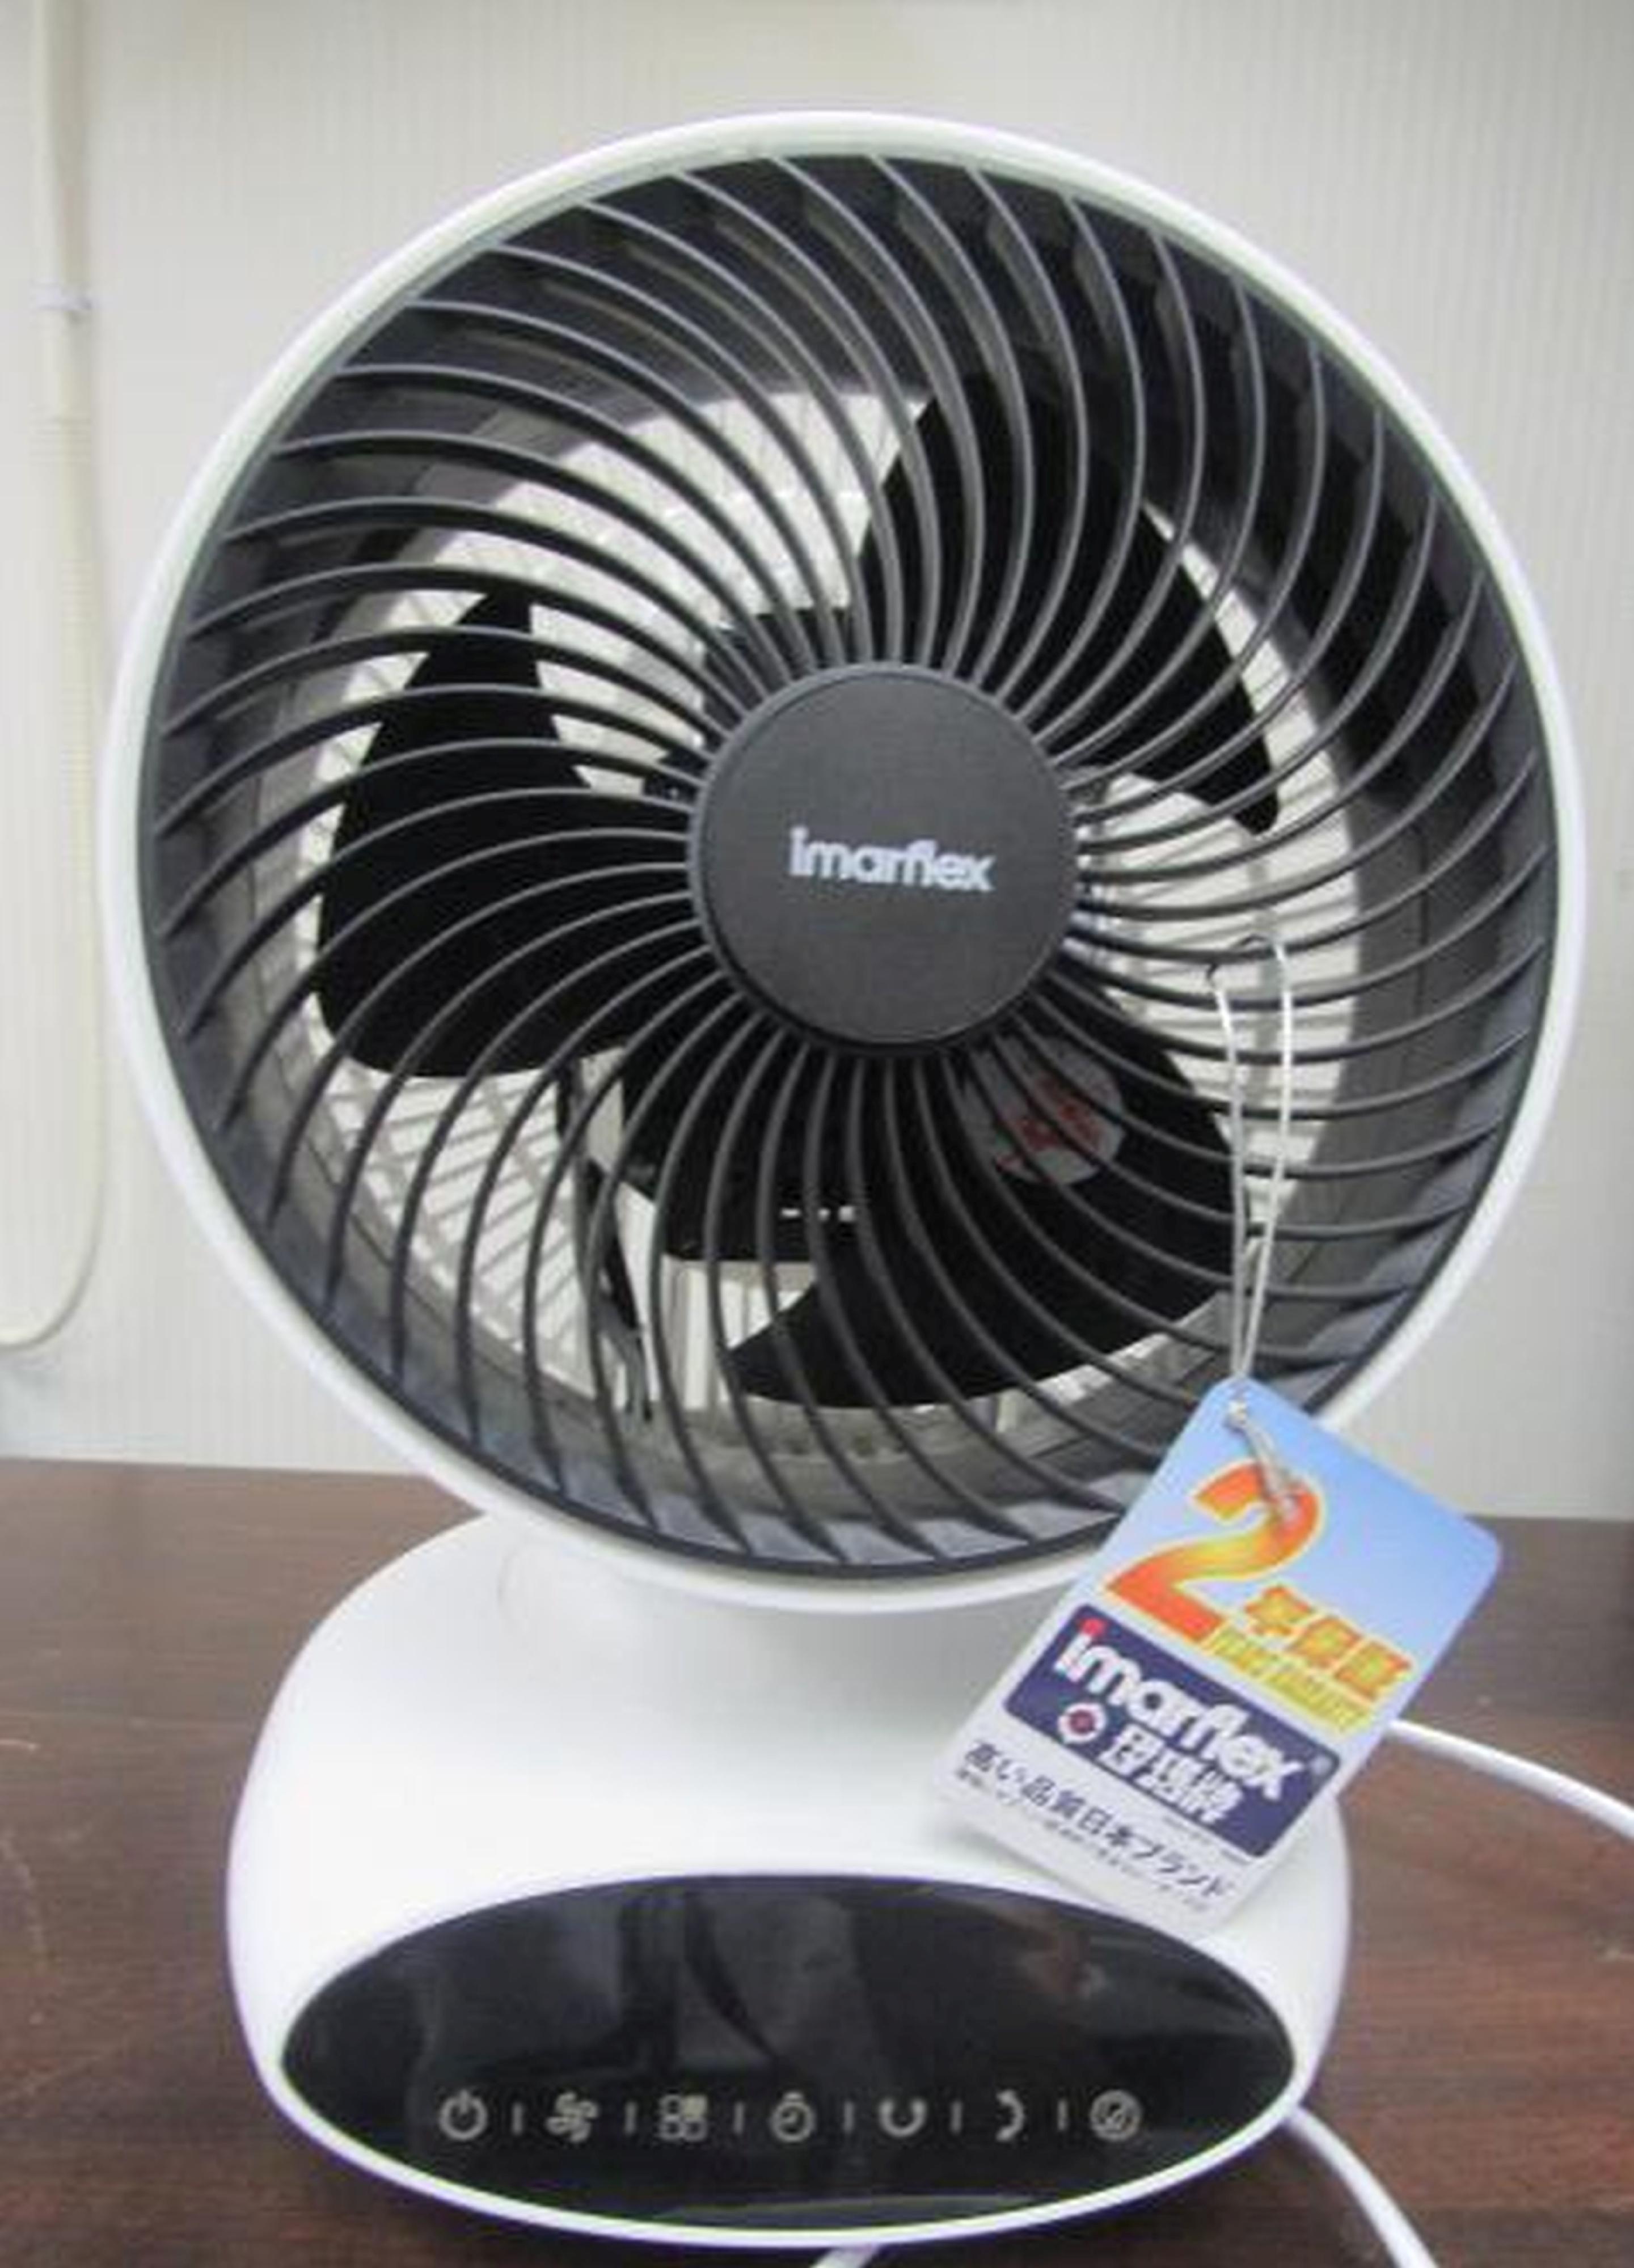 The Electrical and Mechanical Services Department today (June 14) urged the public to stop using a model of an Imarflex air circulator fan with the model number IFQ-243R. Photo shows the air circulator fan model.